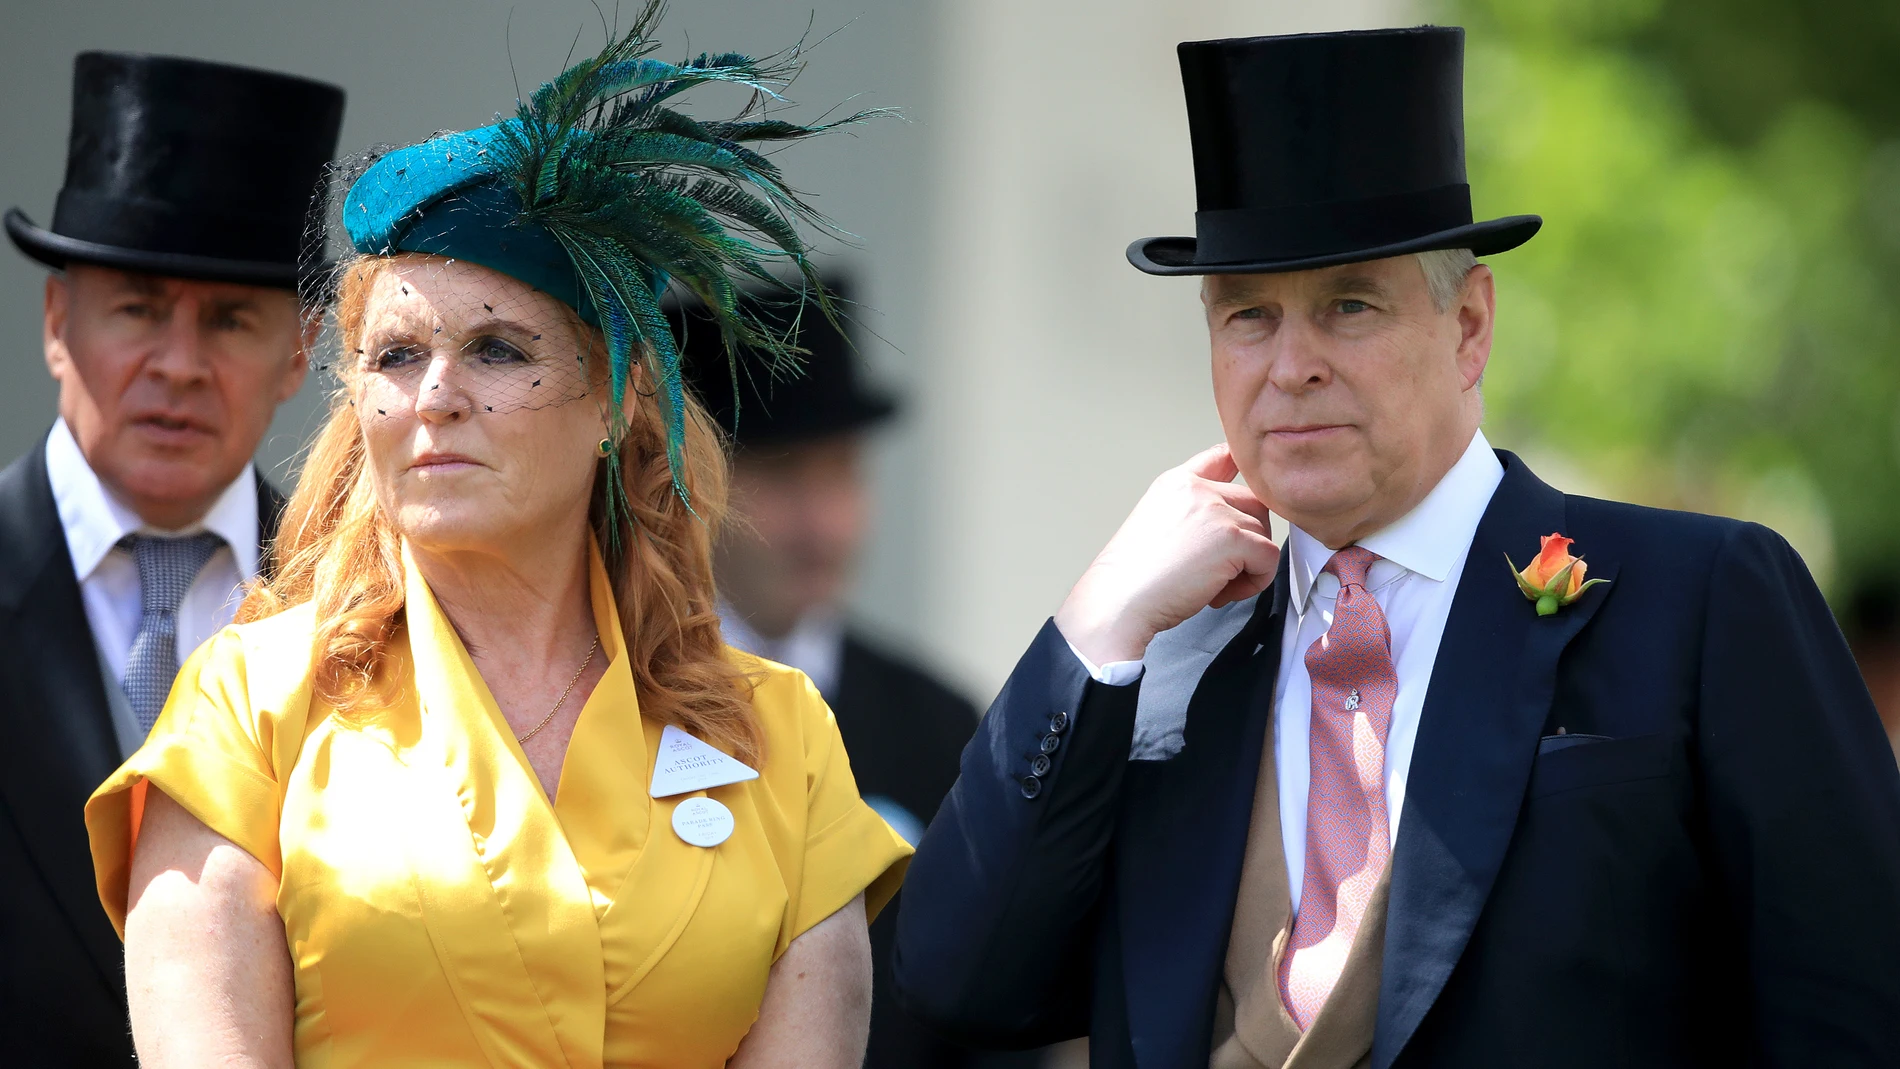 Sarah Ferguson , Duchess of York and Prince Andrew The Duke of York during day four of Royal Ascot at Ascot Racecourse.